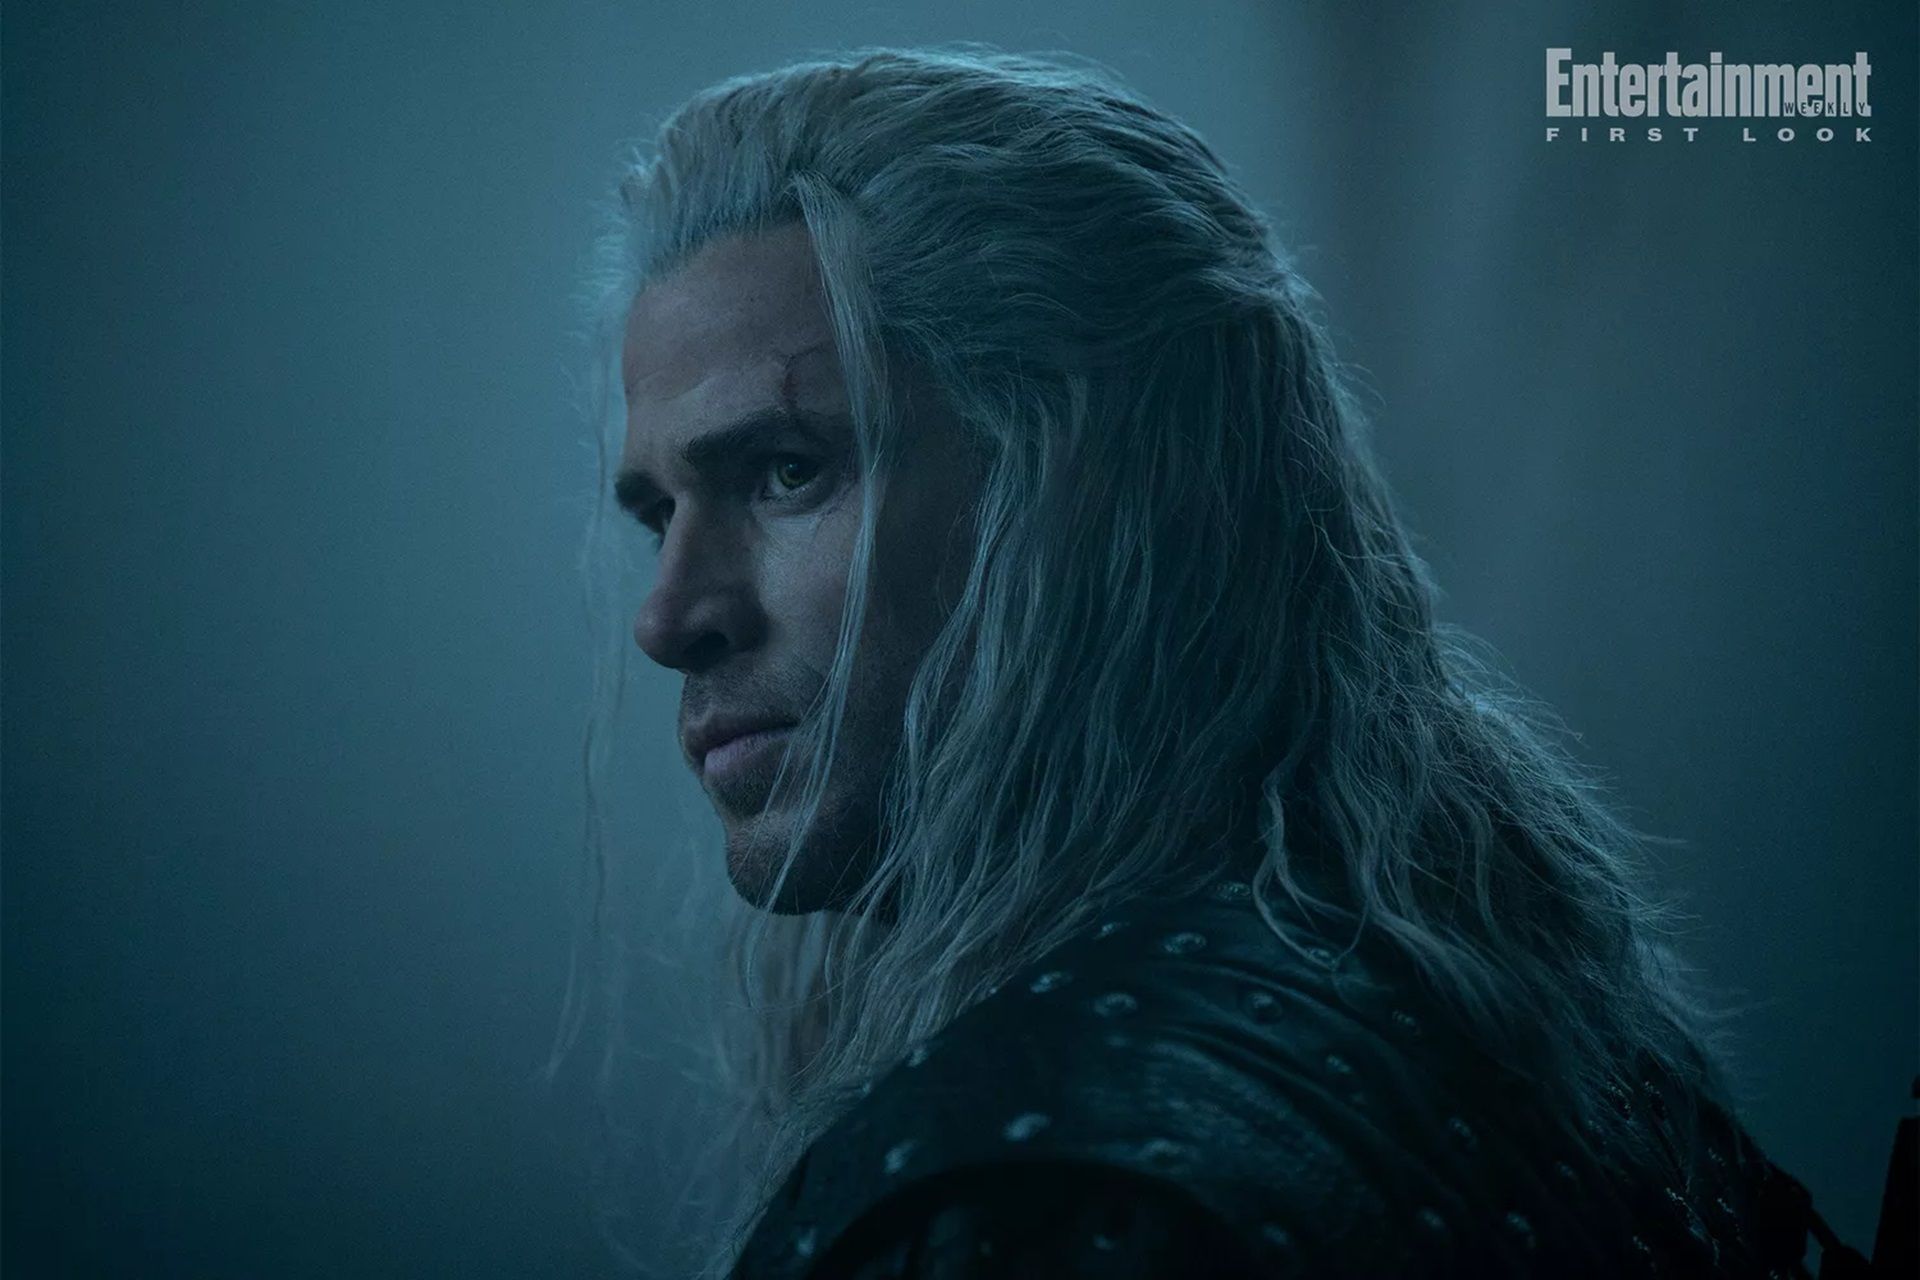 First look at Liam Hemsworth in The Witcher.